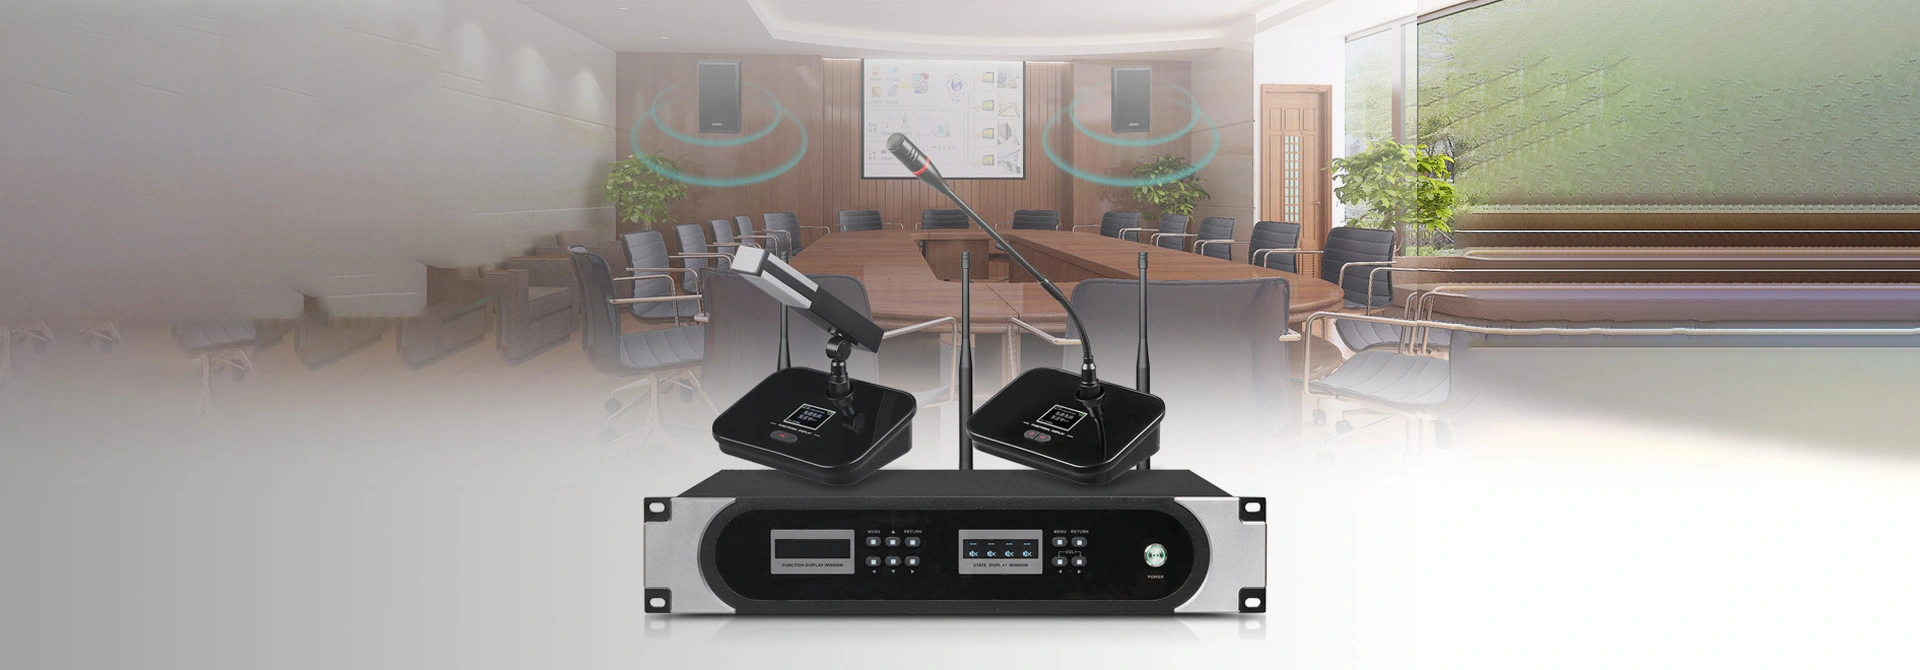 UHF Wireless Conference System Solution for Conference Room DW9866